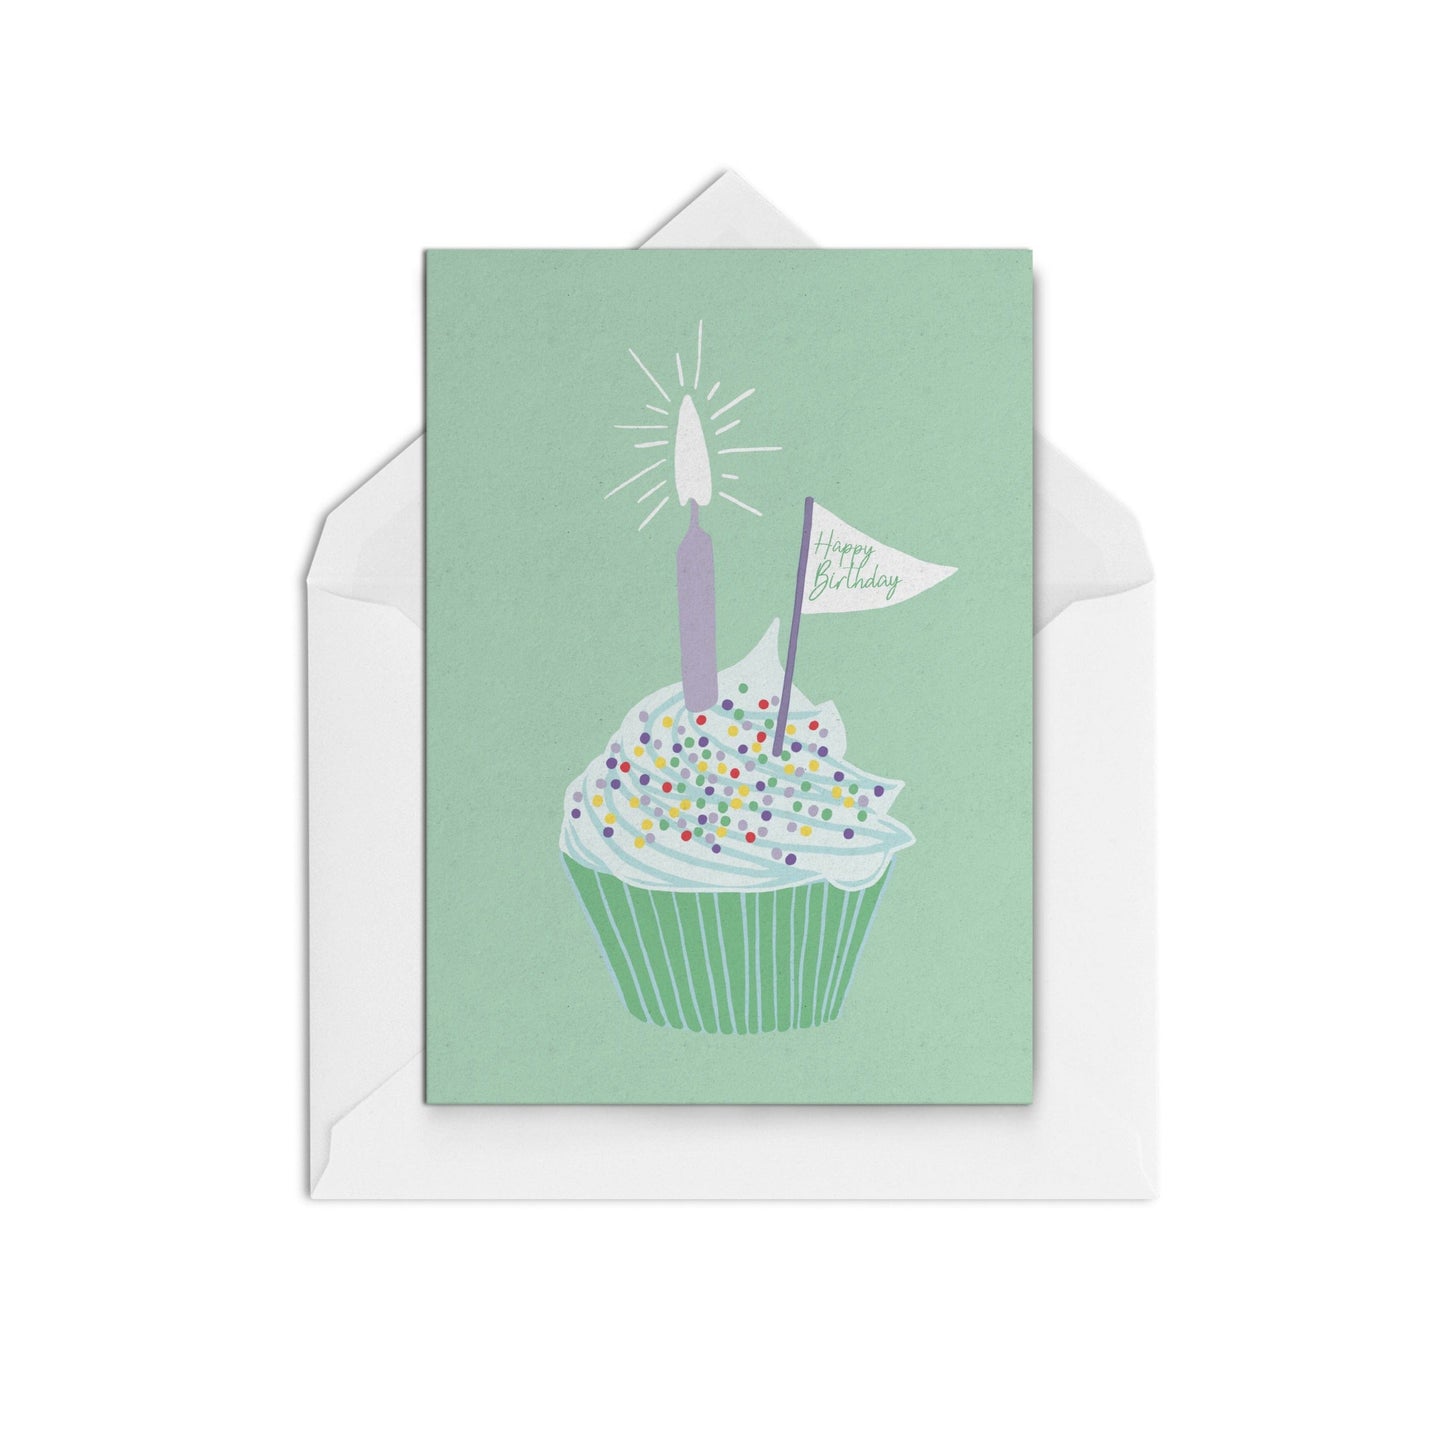 Cupcake - The Paper People Greeting Cards